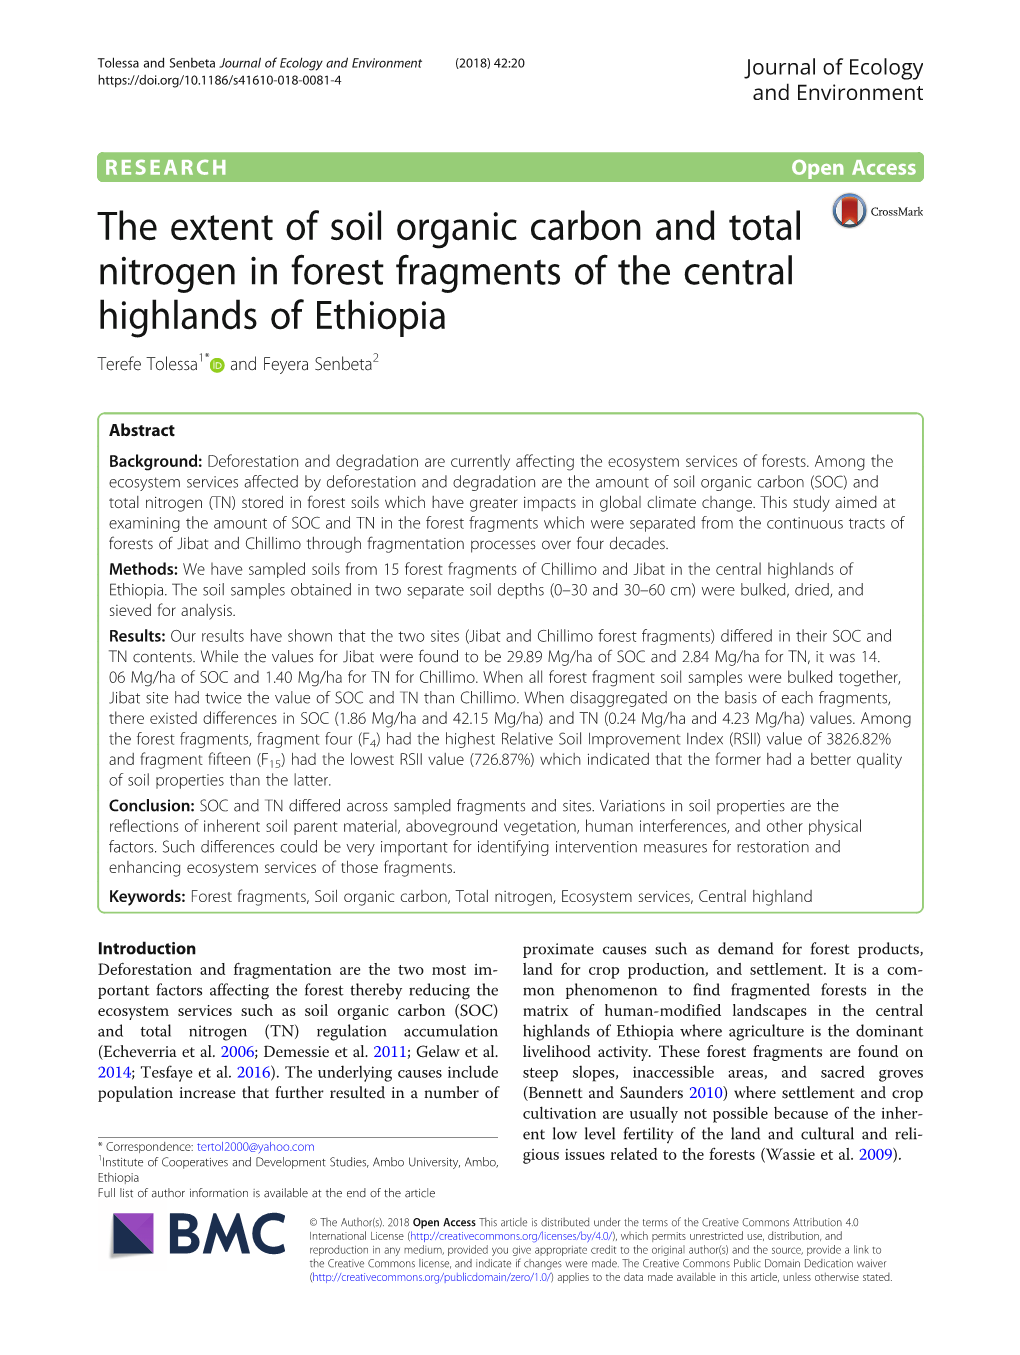 The Extent of Soil Organic Carbon and Total Nitrogen in Forest Fragments of the Central Highlands of Ethiopia Terefe Tolessa1* and Feyera Senbeta2